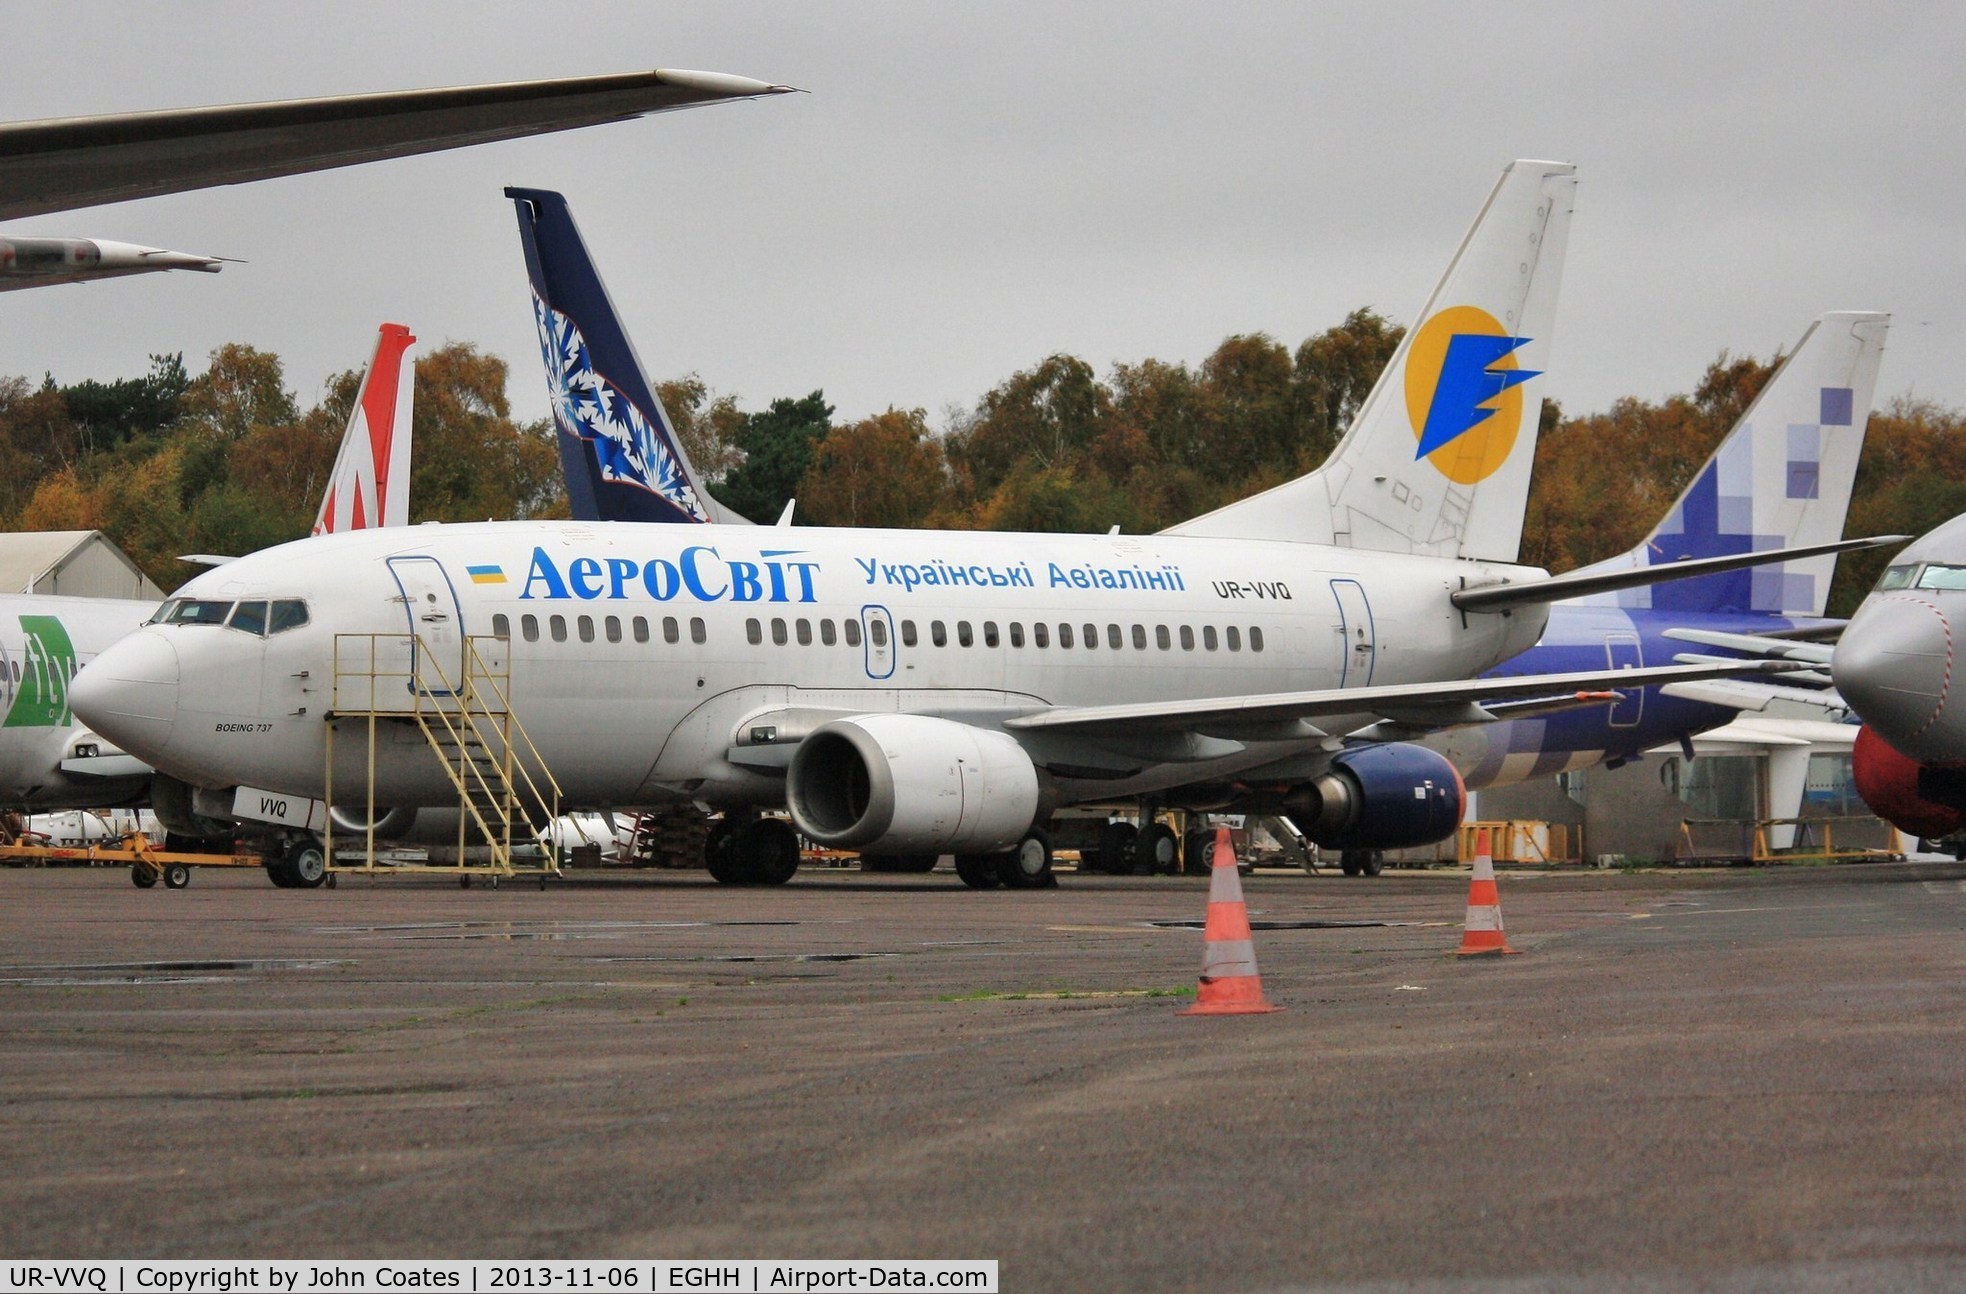 UR-VVQ, 1998 Boeing 737-5L9 C/N 29235, Just arrived from Kiev and now in storage at European Aviation.